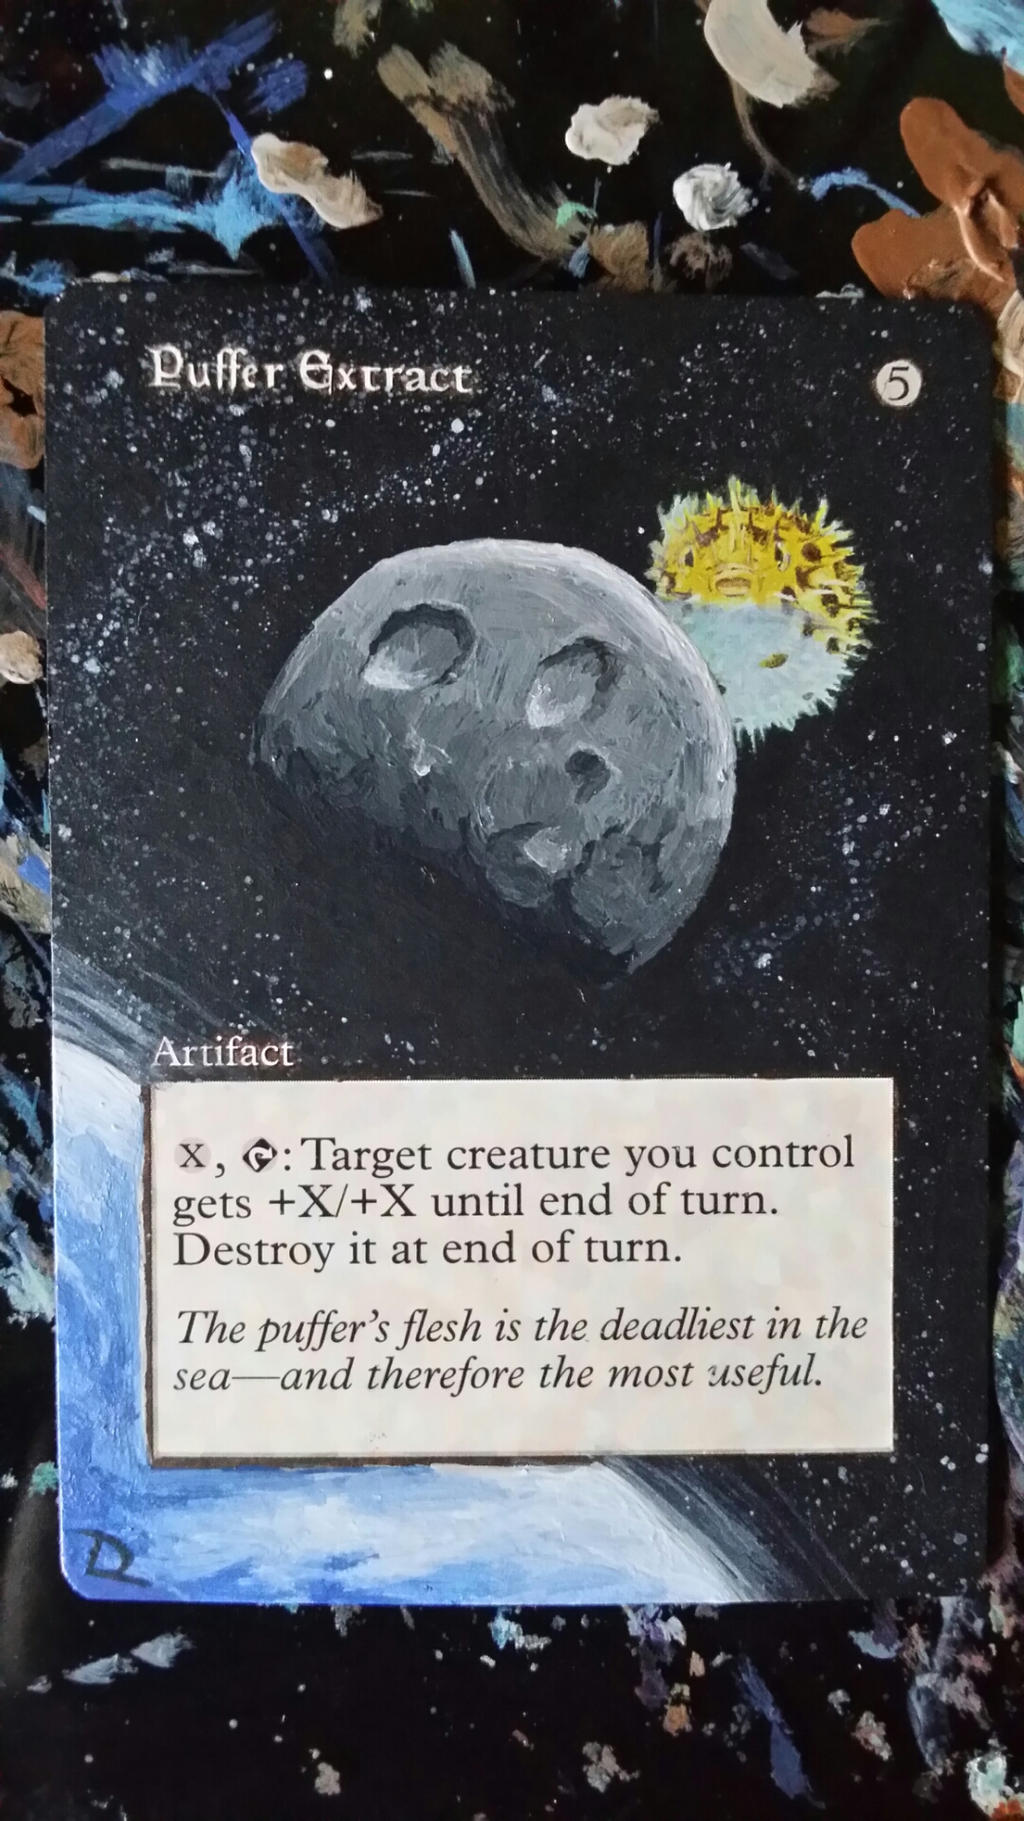 Puffer Extract gag alter